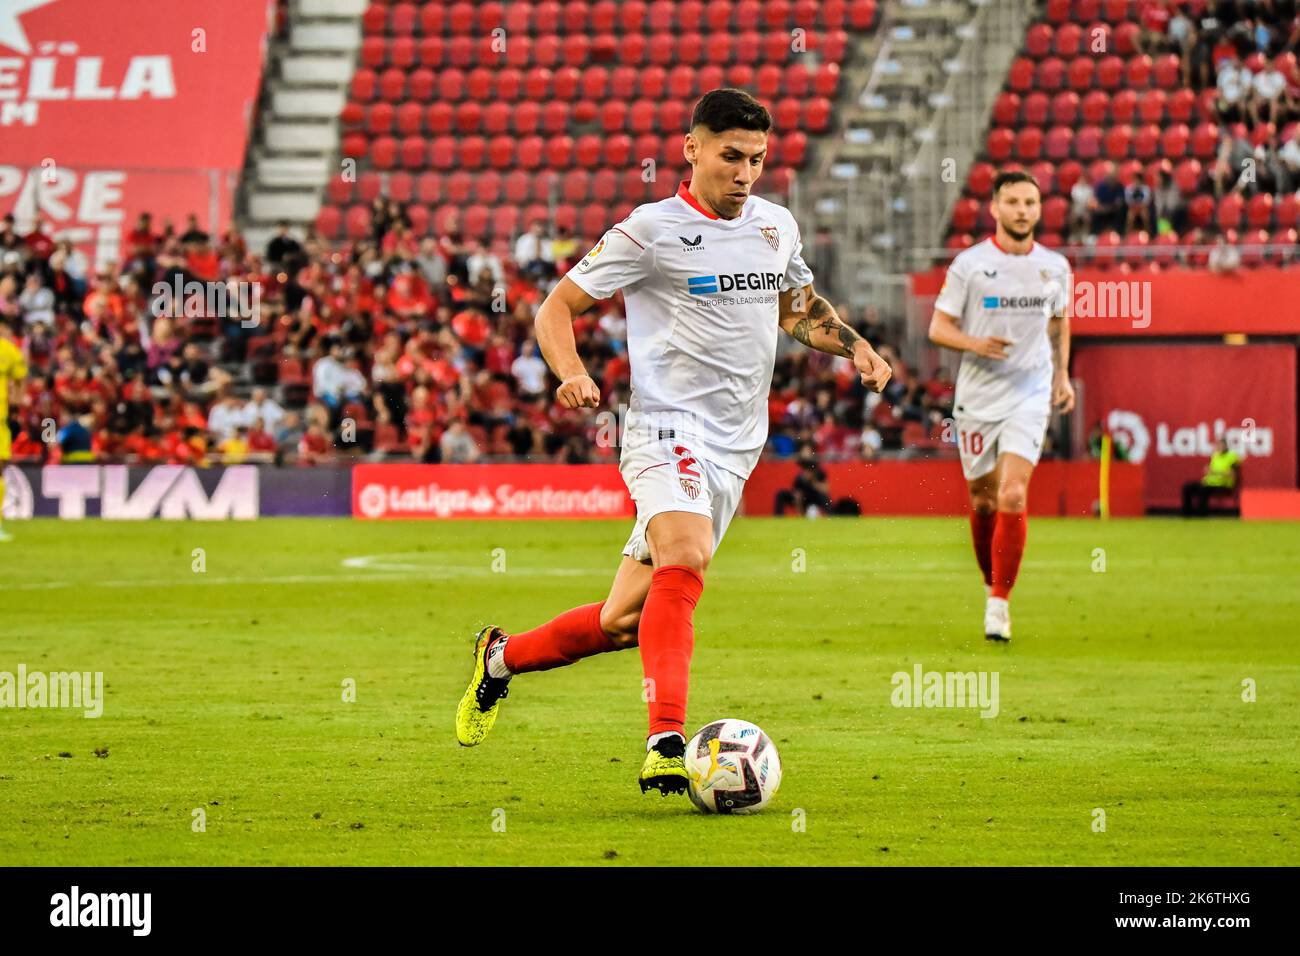 MALLORCA, SPAIN - OCTOBER 15: Gonzalo Montiel of Sevilla CF drives the ball during the match between RCD Mallorca and Sevilla CF of La Liga Santander on October 15, 2022 at Son Moix Stadium of Mallorca, Spain. (Photo by Samuel Carreño/PxImages) Credit: Px Images/Alamy Live News Stock Photo